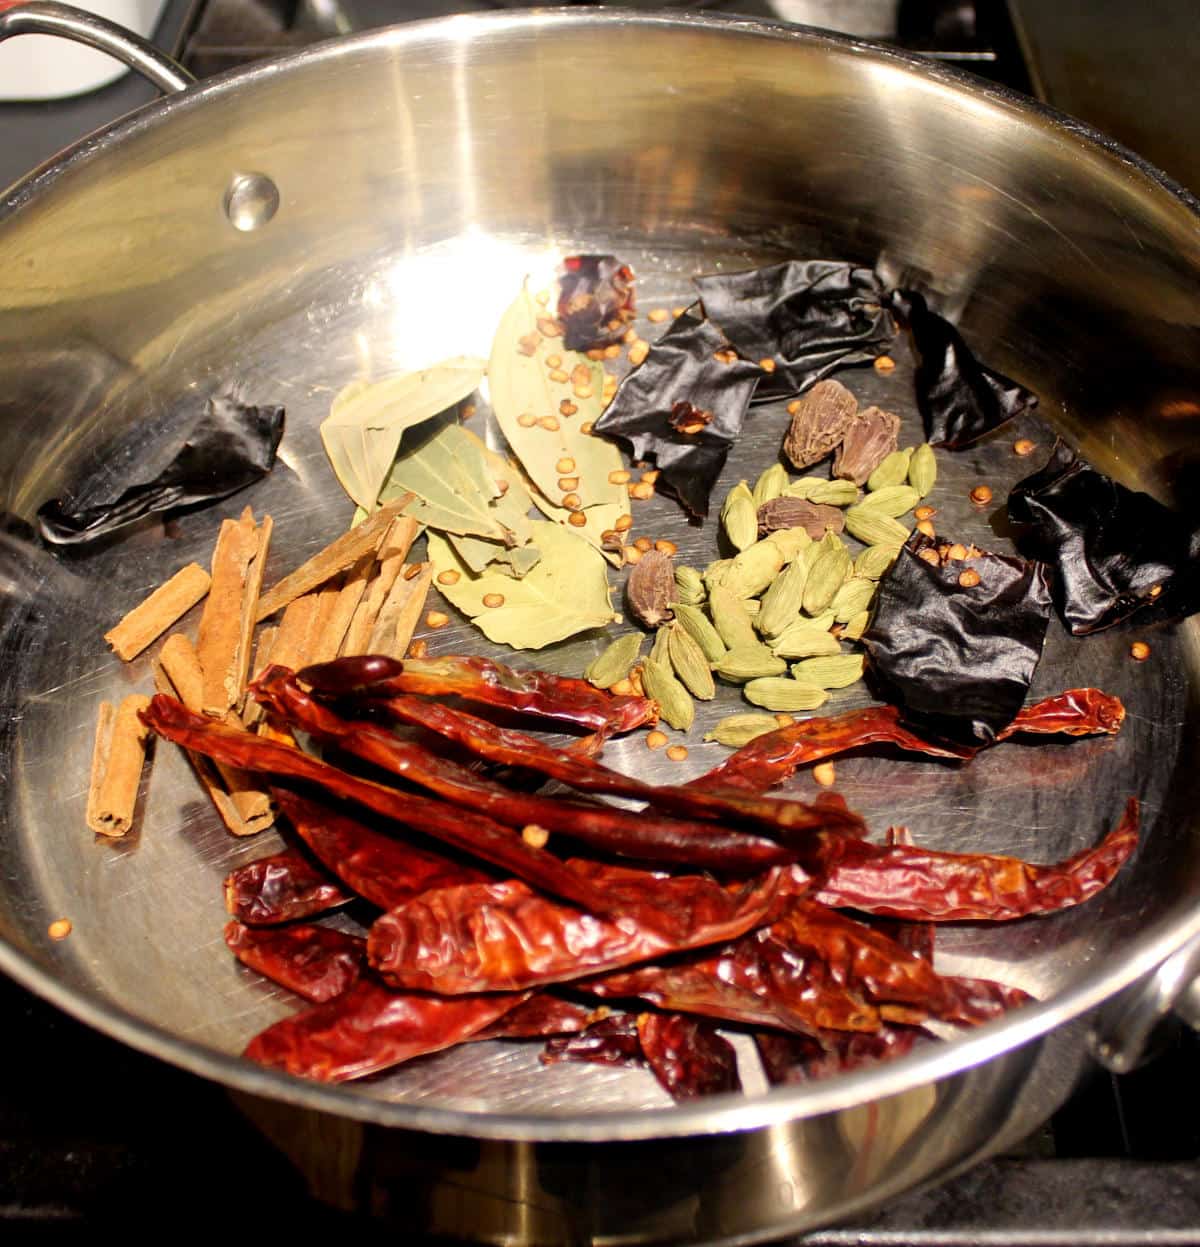 Large spices for garam masala, including bay leaves, chili peppers, cinnamon, cardamom, added to a wide steel skillet.